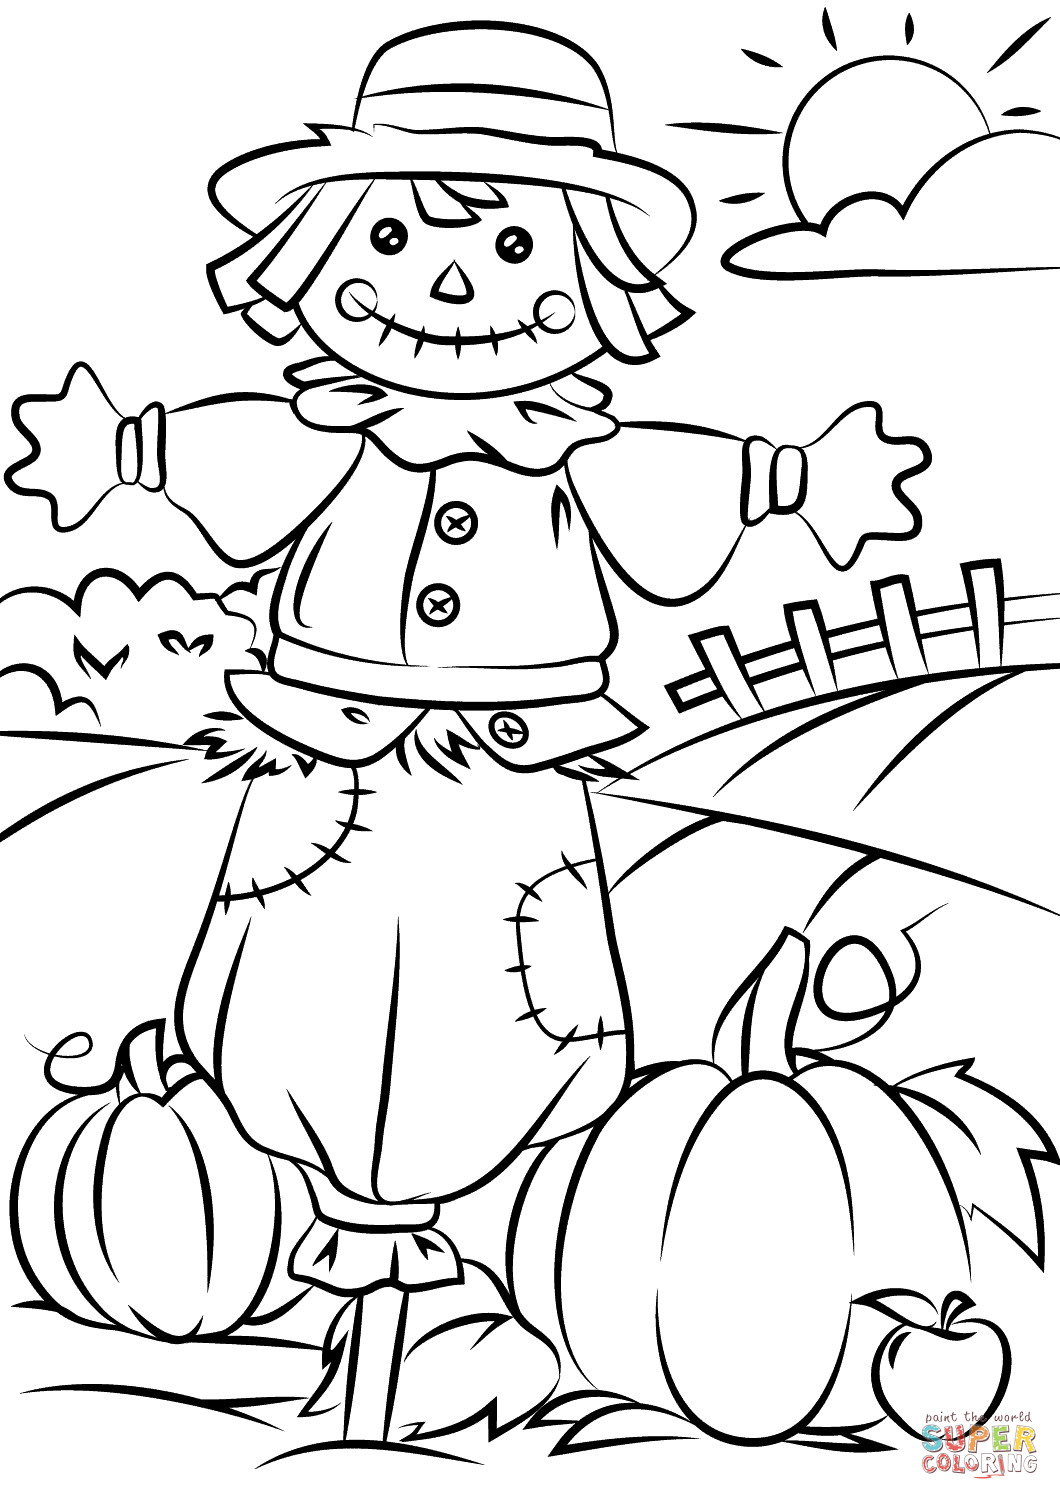 Printable Coloring Pages For Kids Fall
 Coloring Autumn Scene with Scarecrow Coloring Page Free